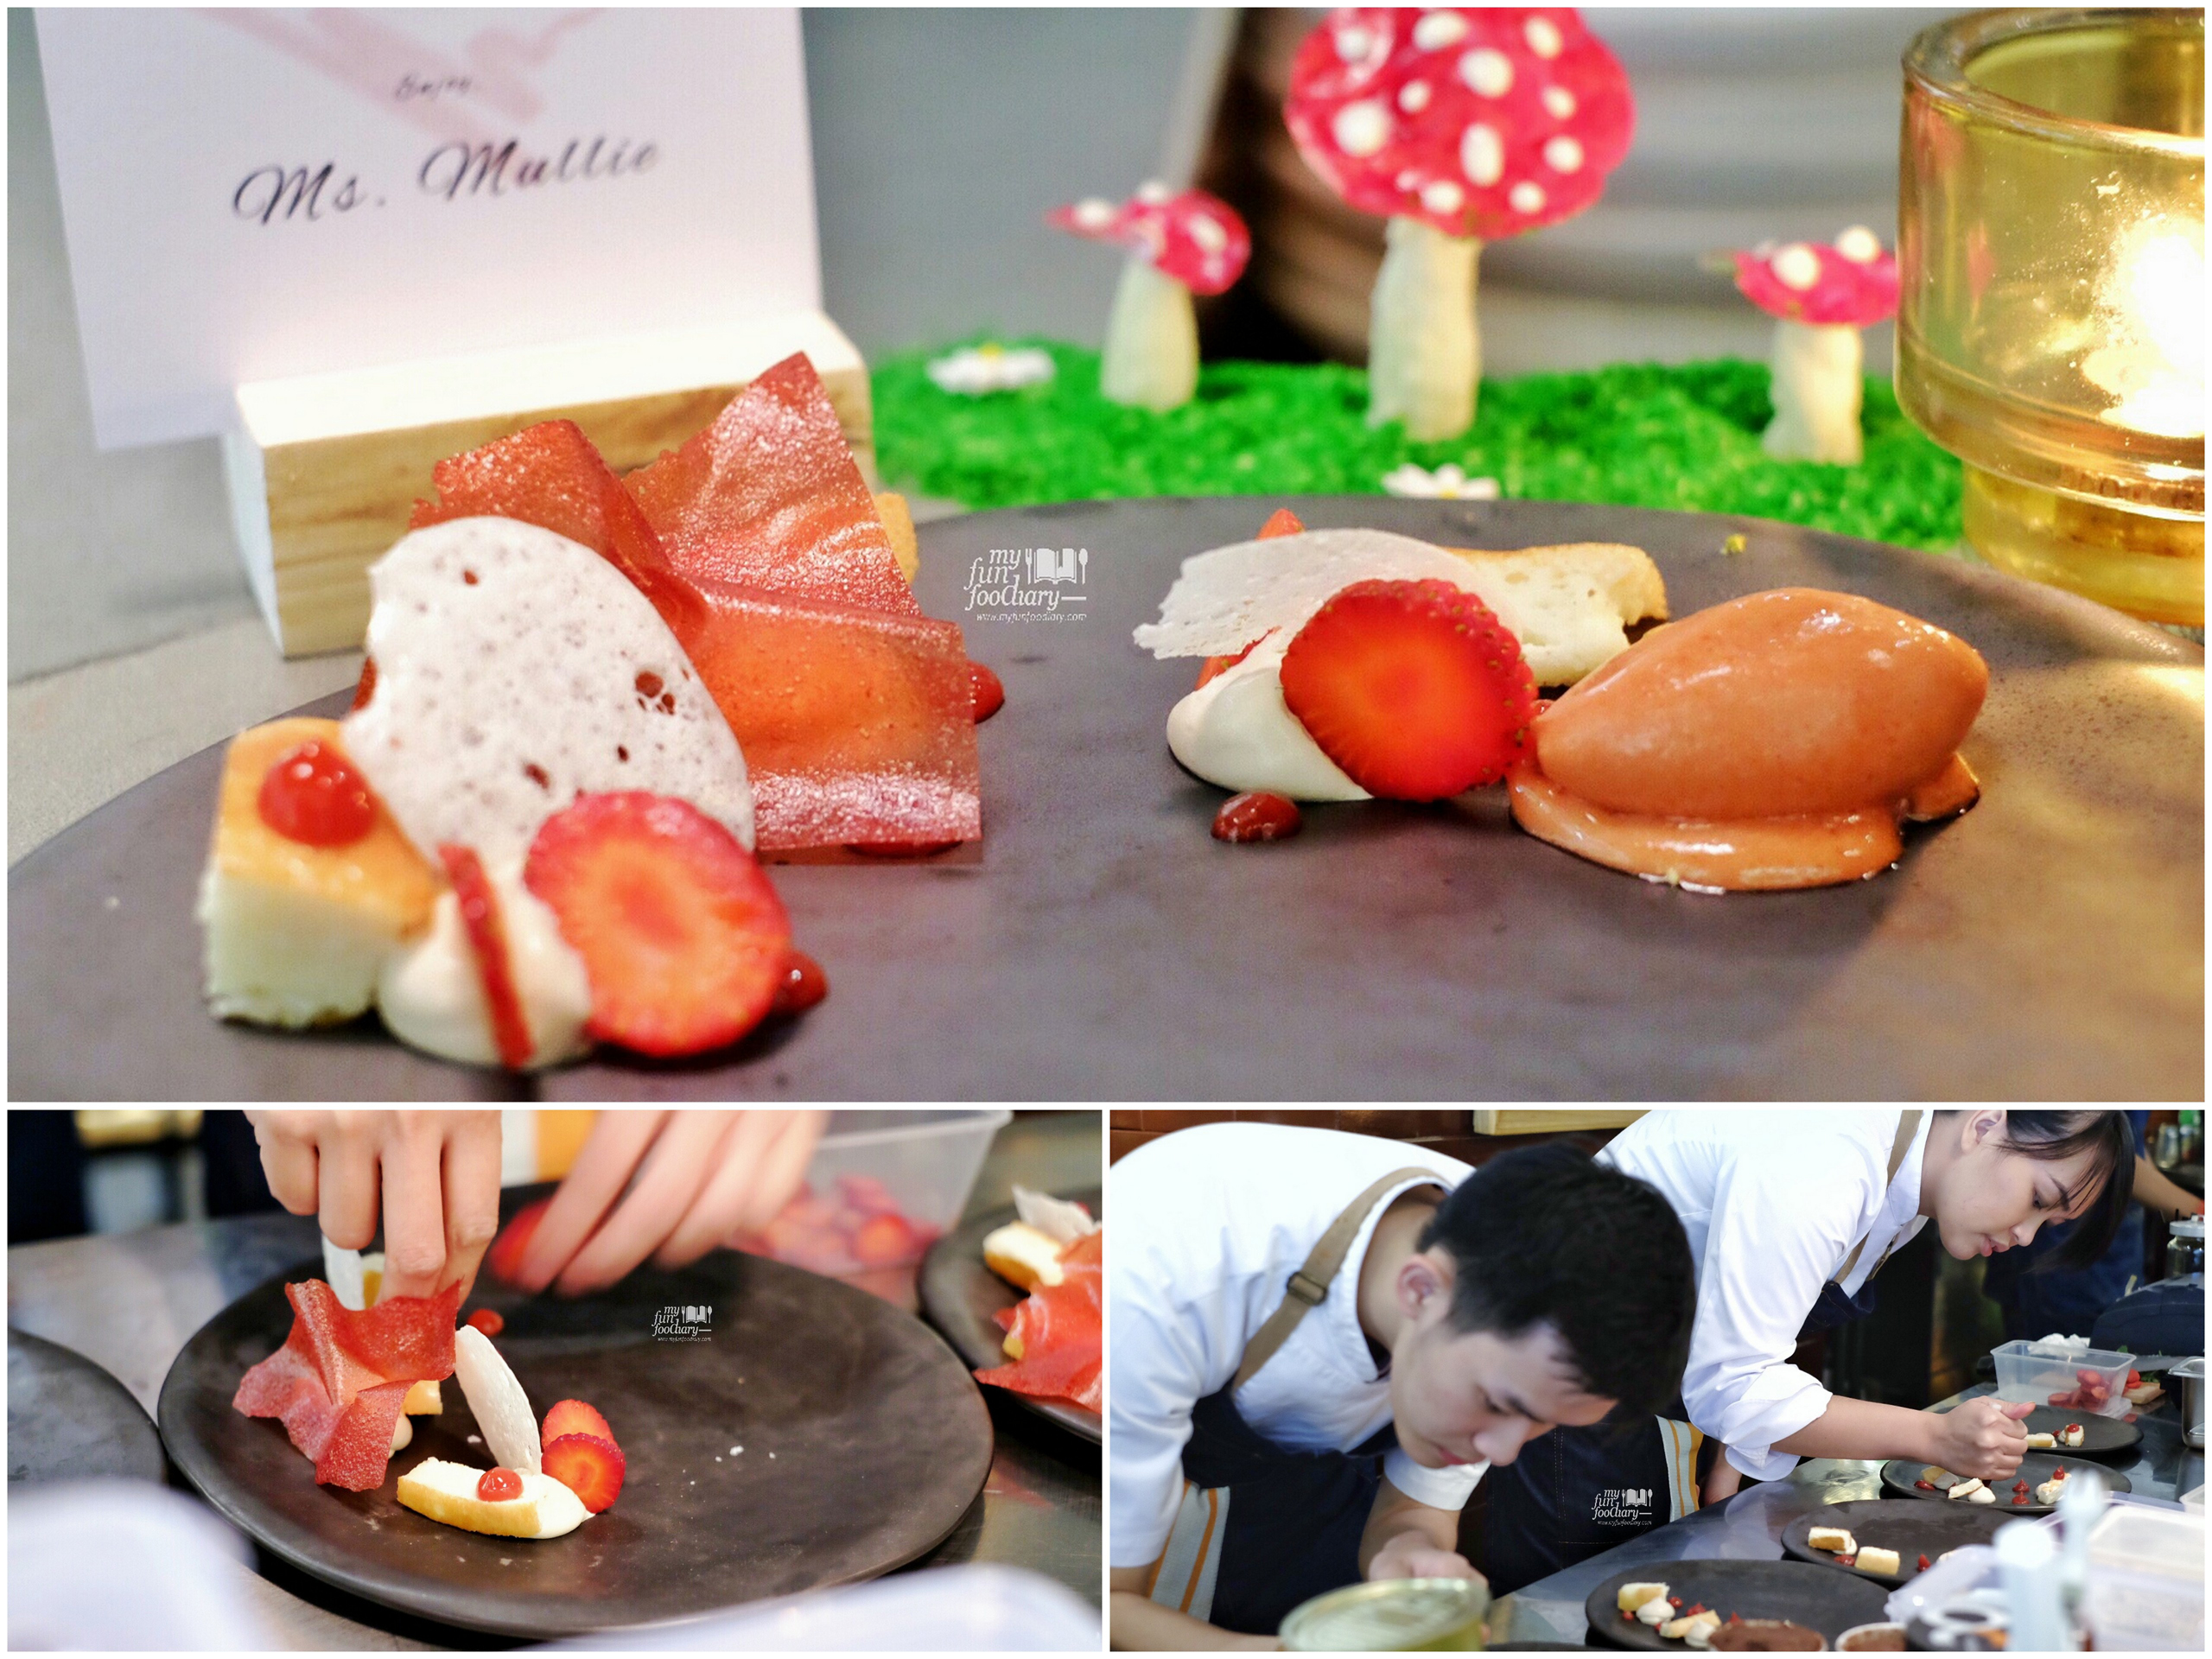 All About Strawberry - Dessert Omakase by Kim at Nomz - by Myfunfoodiary